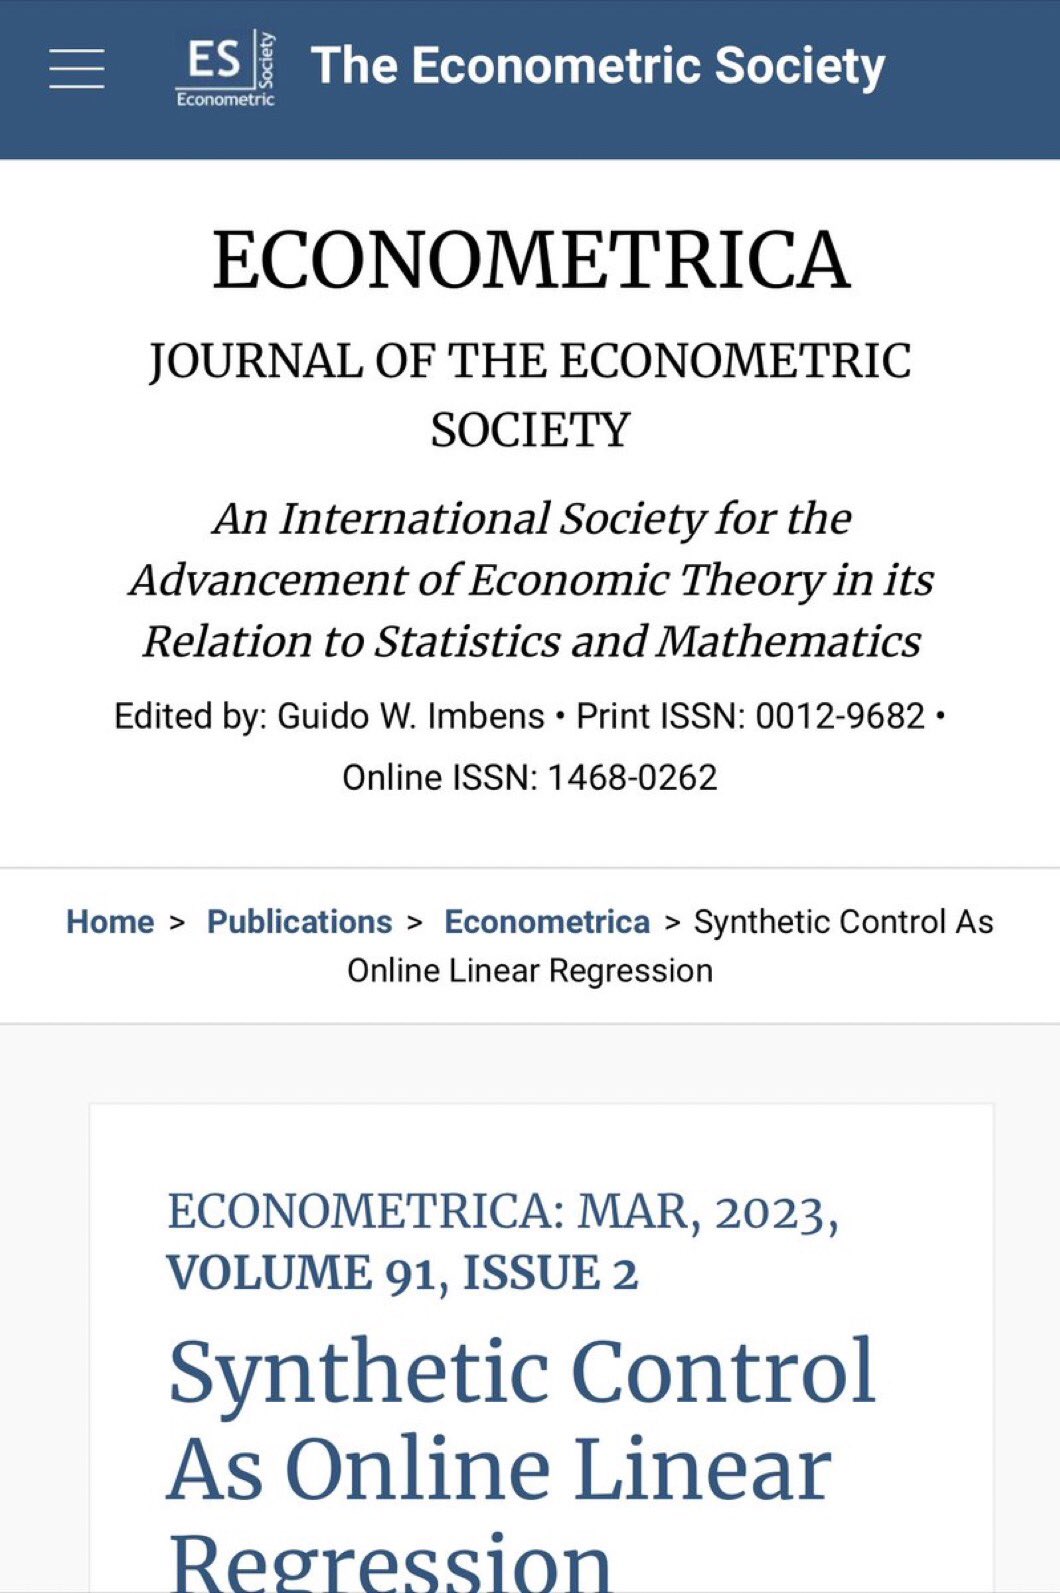 Stream Read ❤️ PDF Models in Microeconomic Theory: 'He' Edition